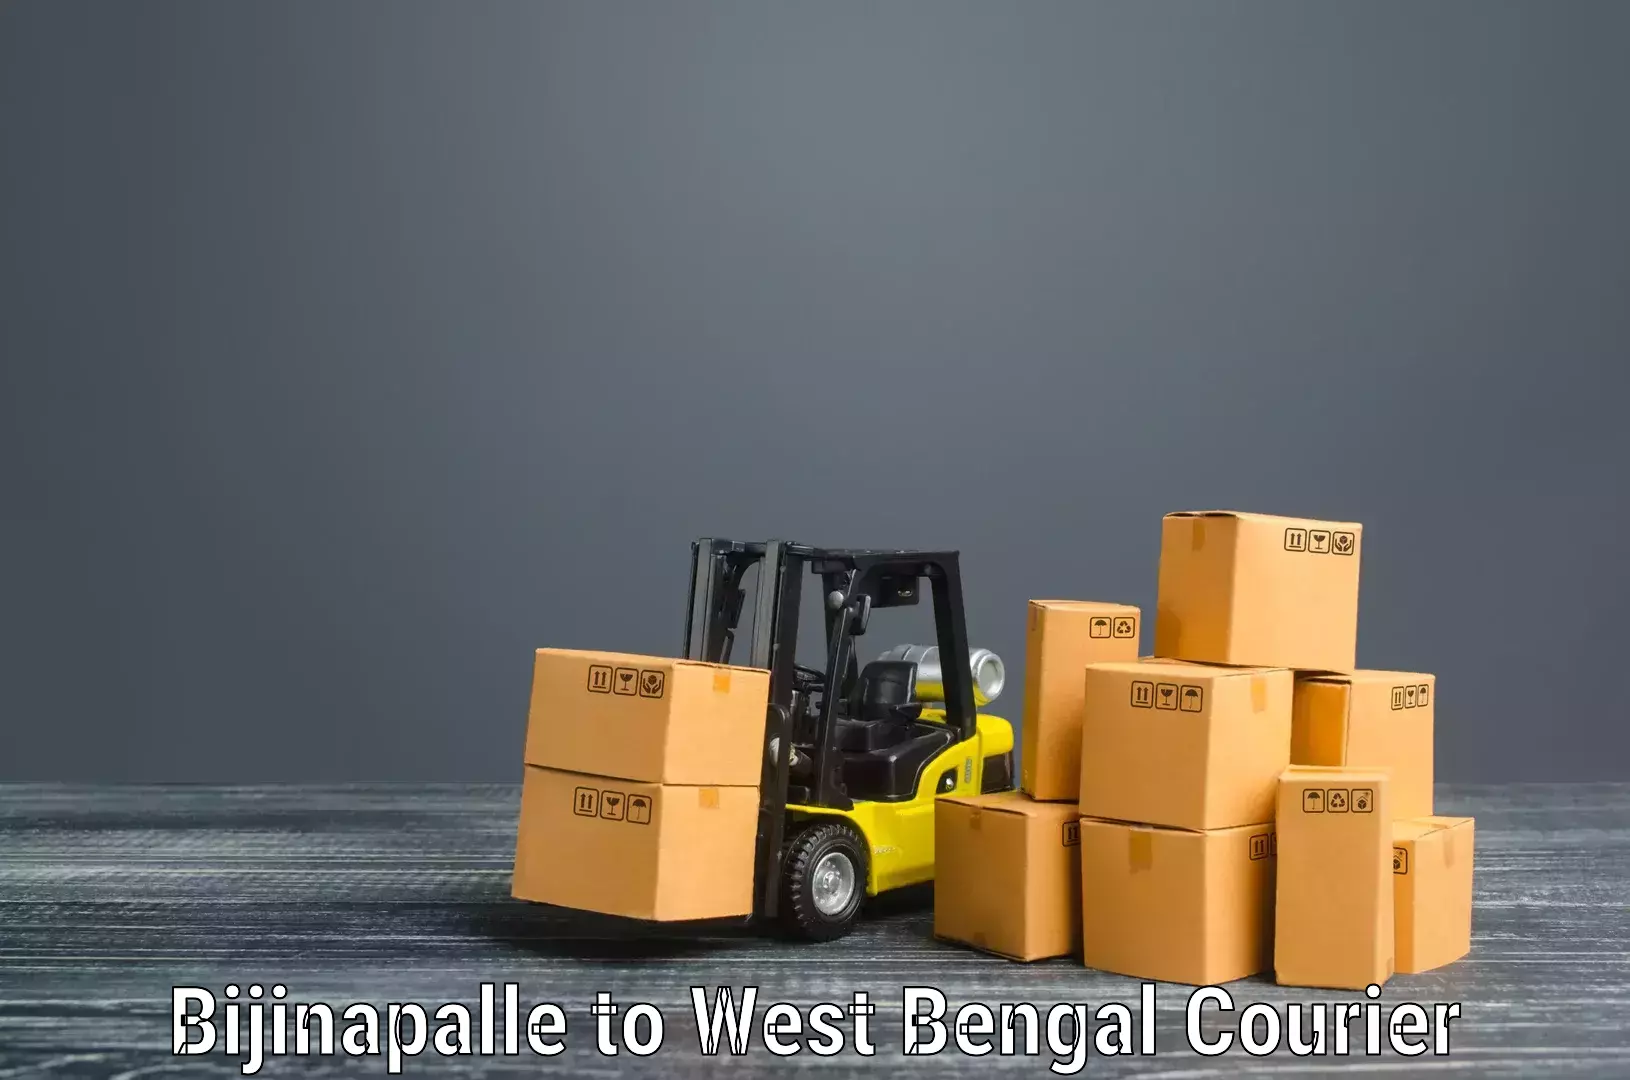 Quality relocation assistance in Bijinapalle to Ennore